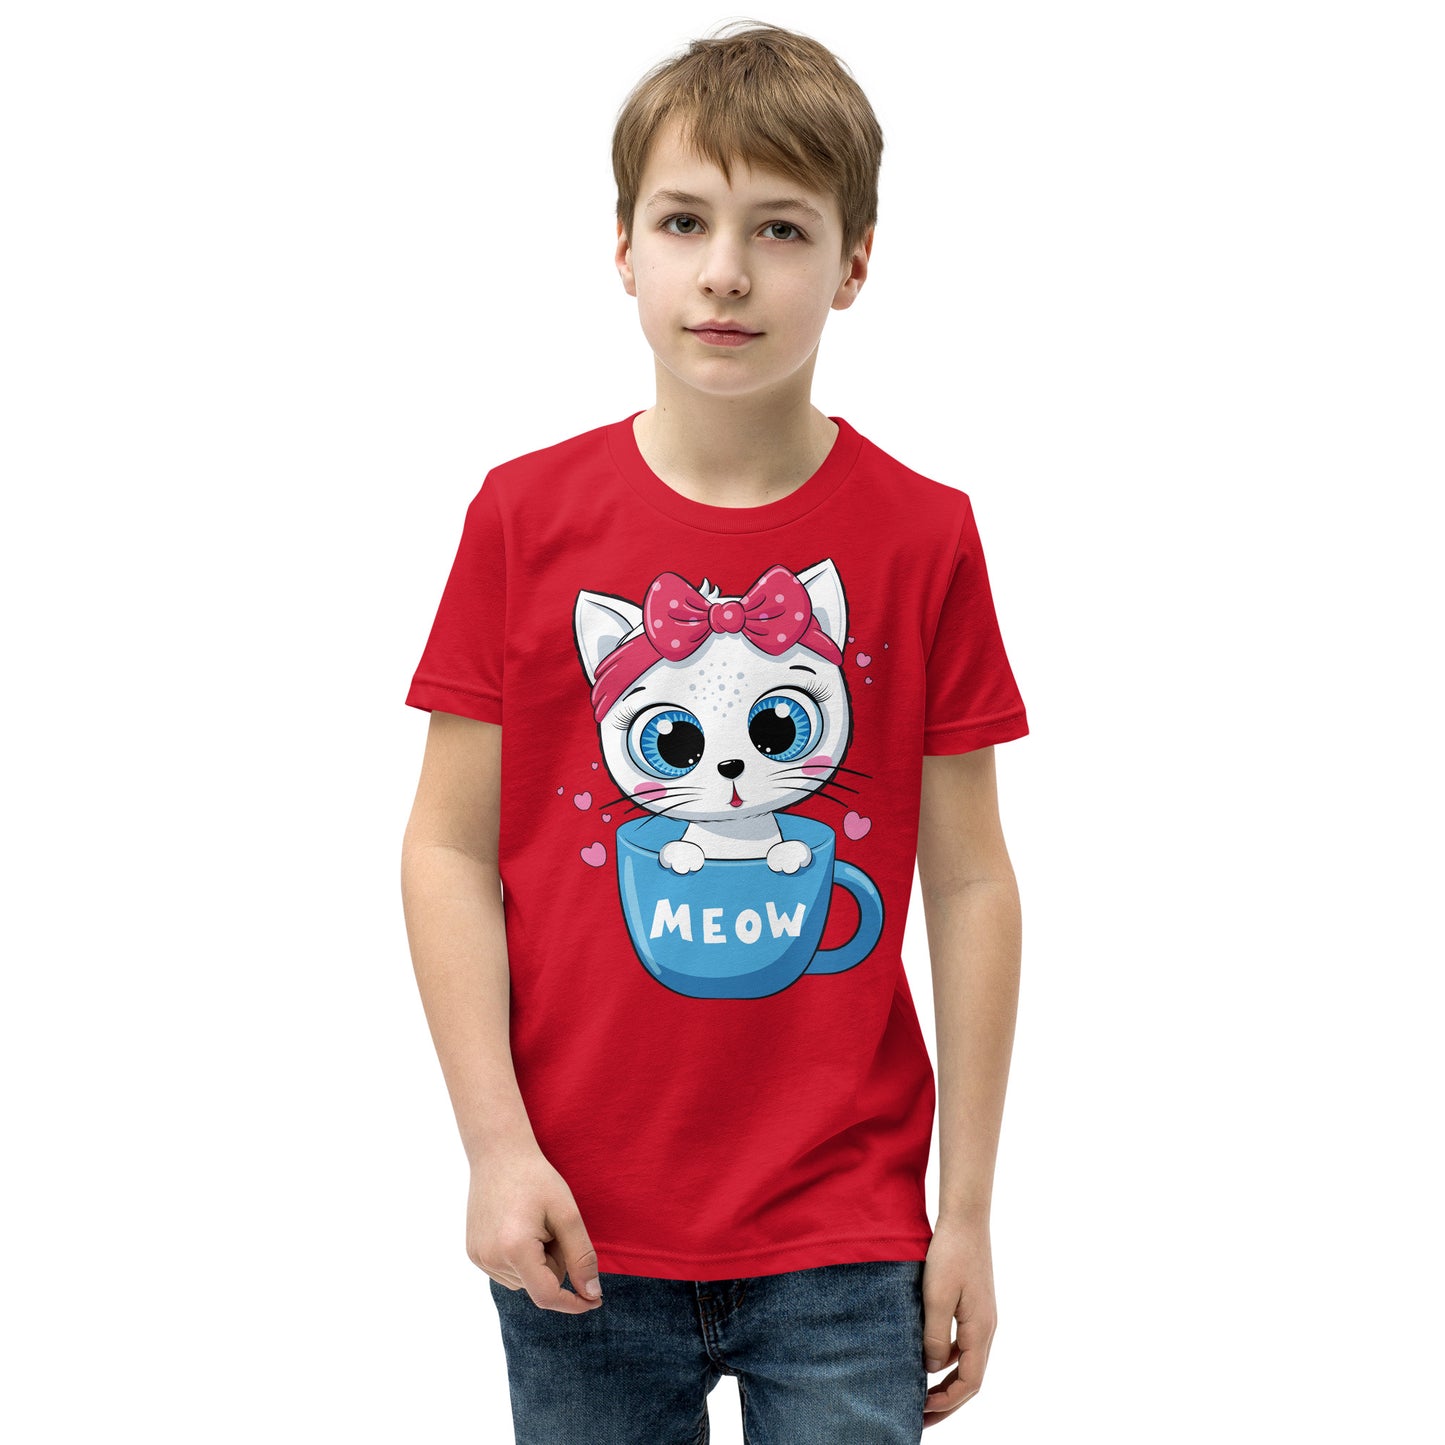 Cute Baby Cat Sitting in Cup T-shirt, No. 0269